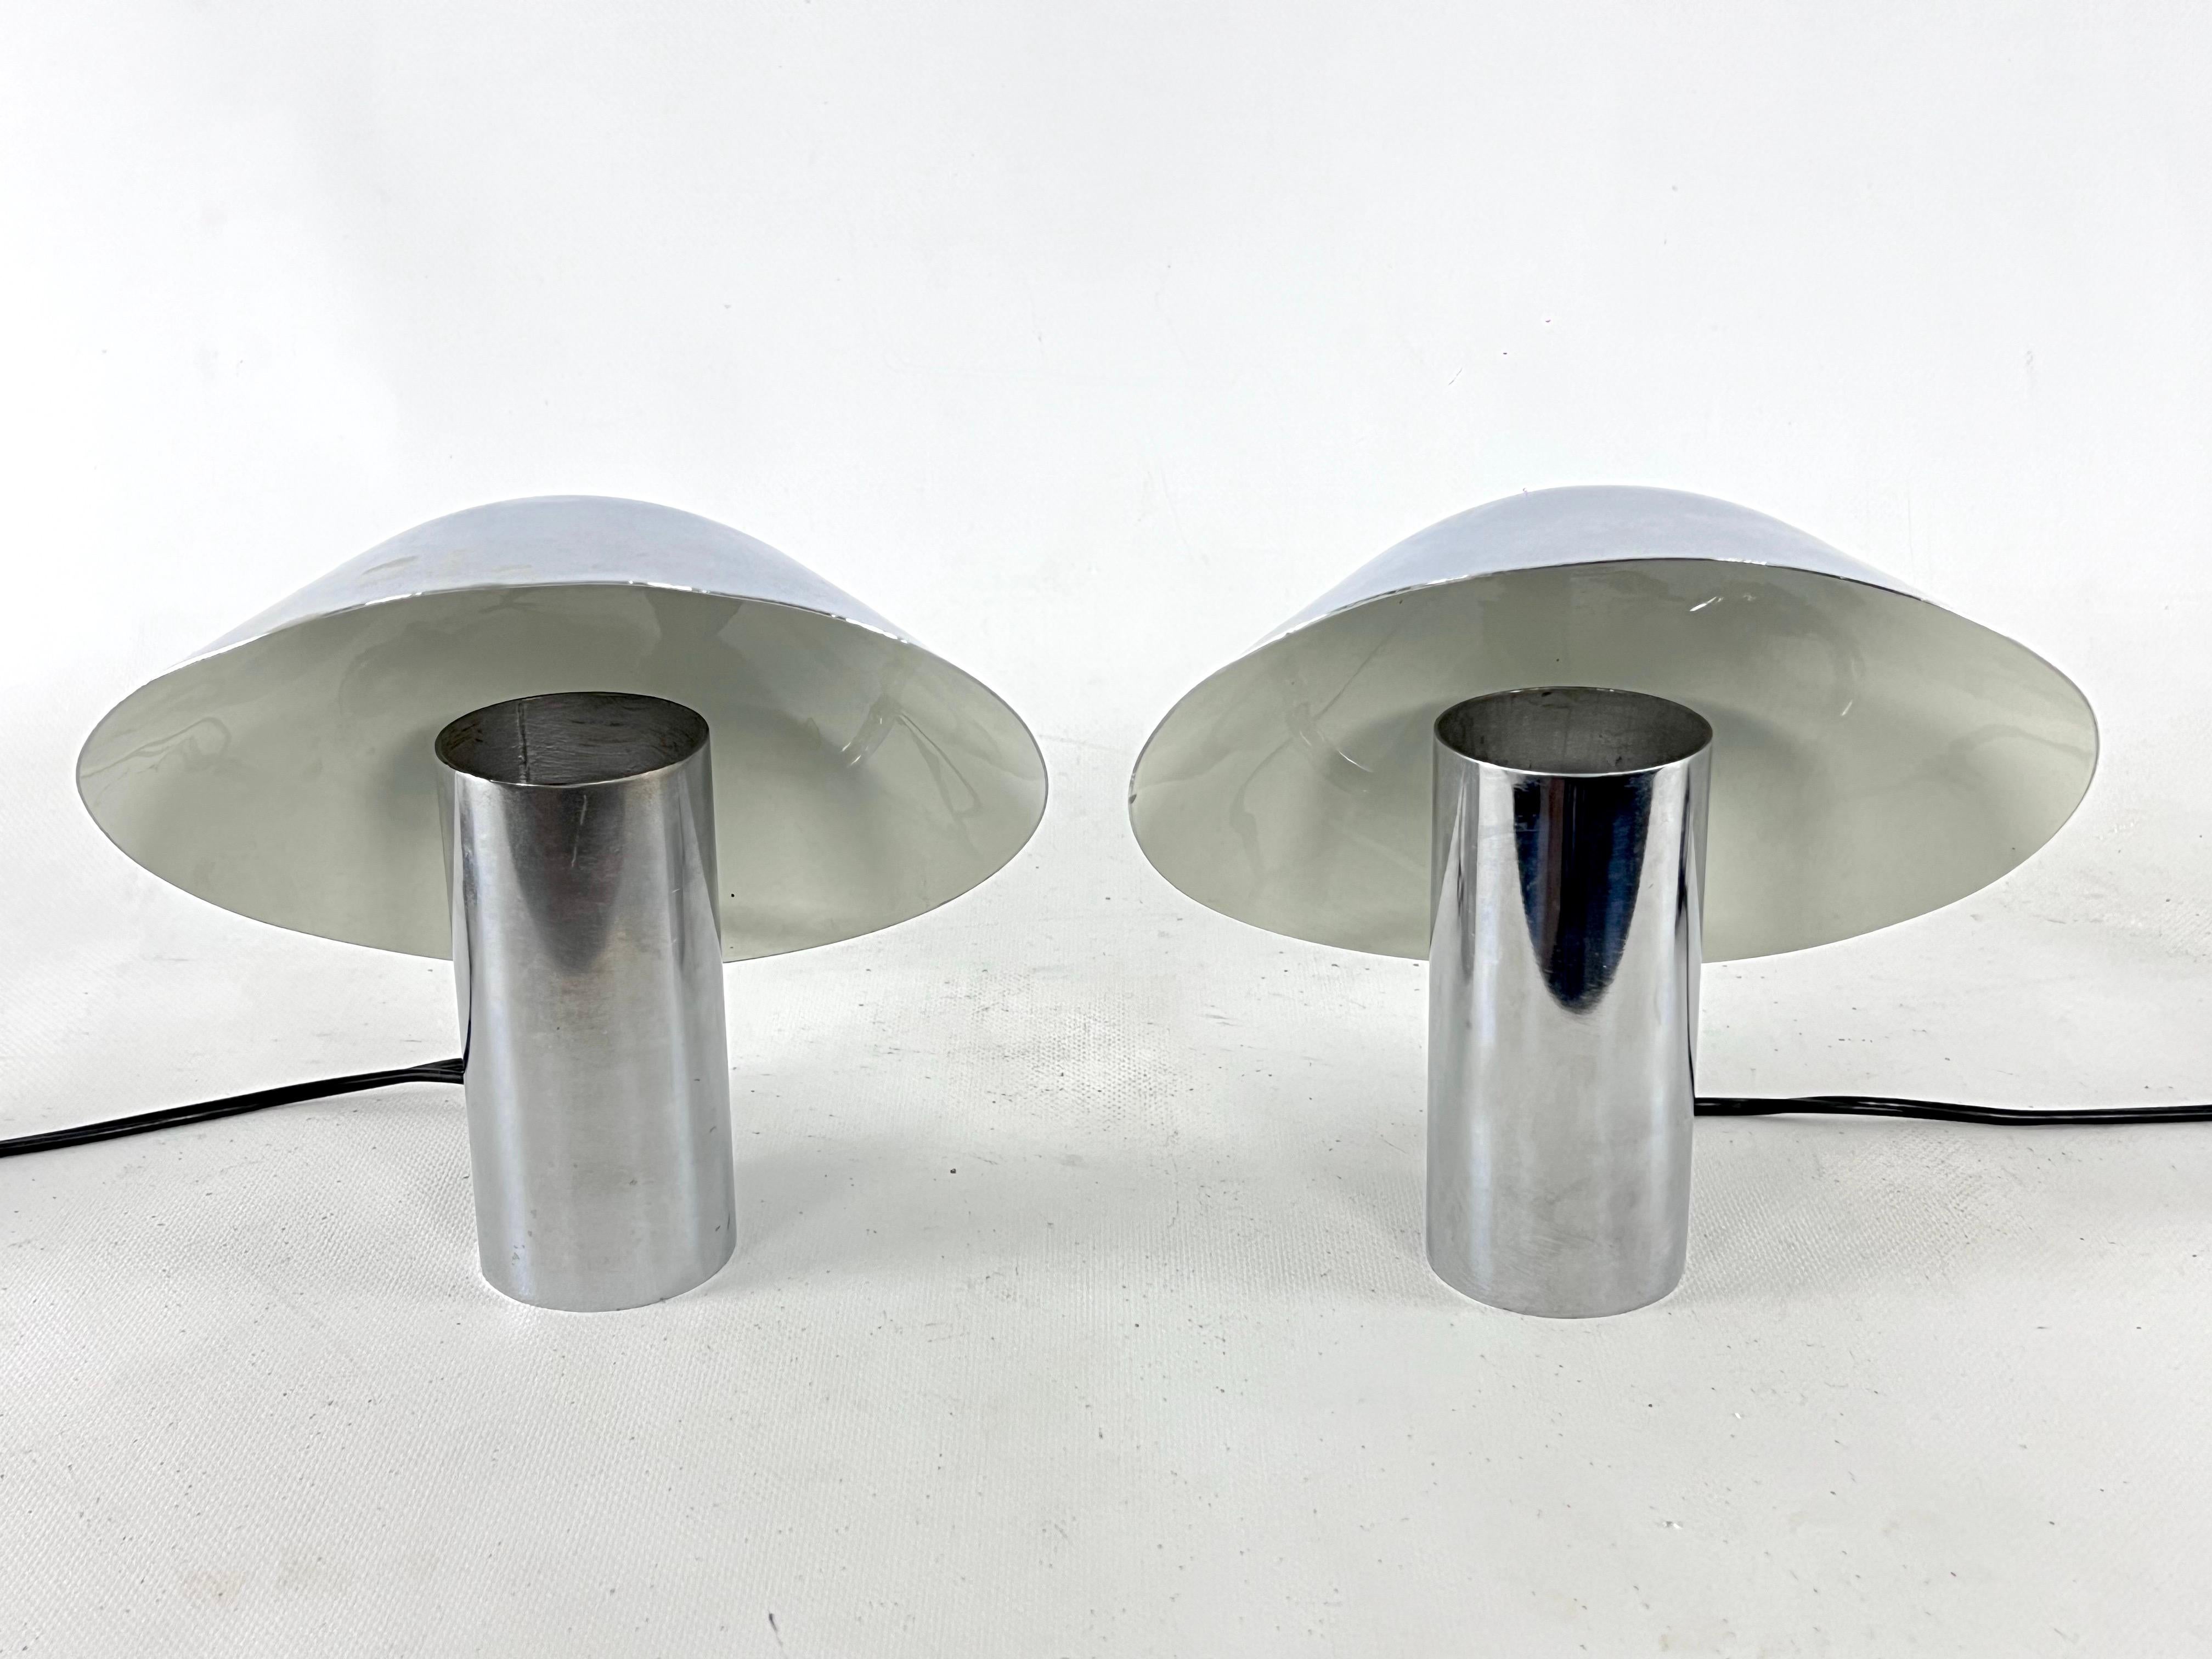 Good vintage condition with normal trace of age and use for this rare set of two table lamps designed by Sergio Mazza and Giuliana Gramigna for Quattrifolio. Produced in Italy during the 70s. Full working with EU standard, adaptable on demand for